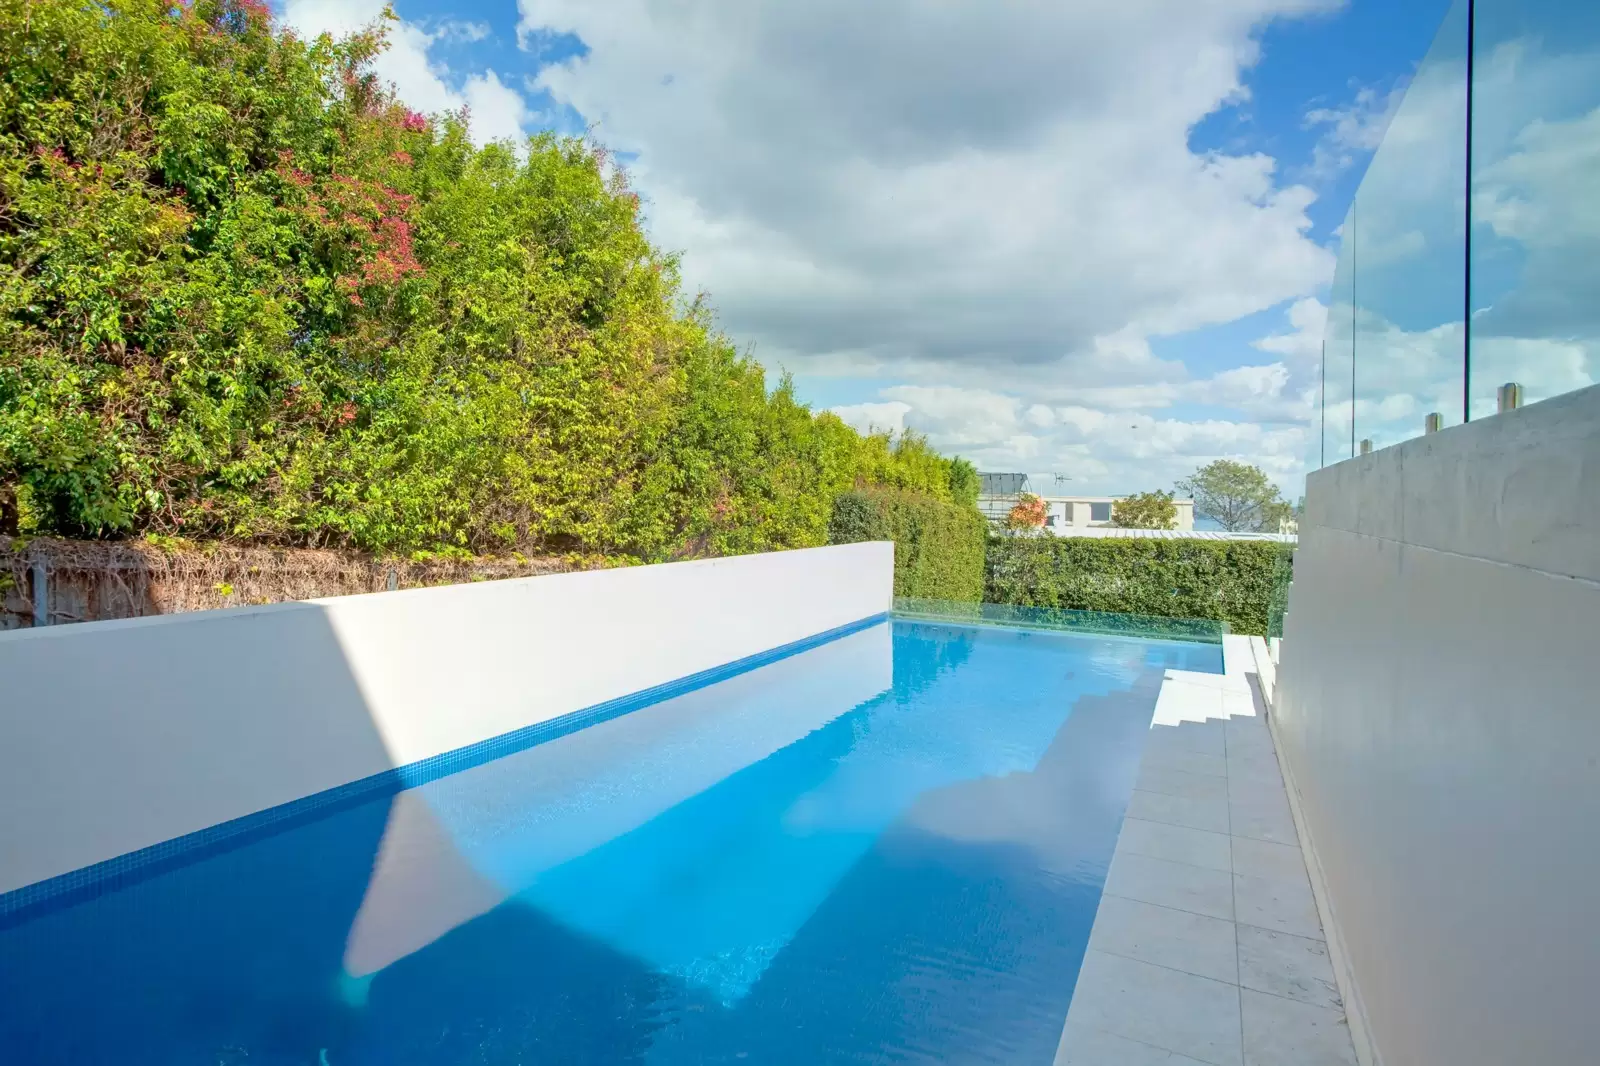 Photo #9: 2B Nulla Street, Vaucluse - Sold by Sydney Sotheby's International Realty